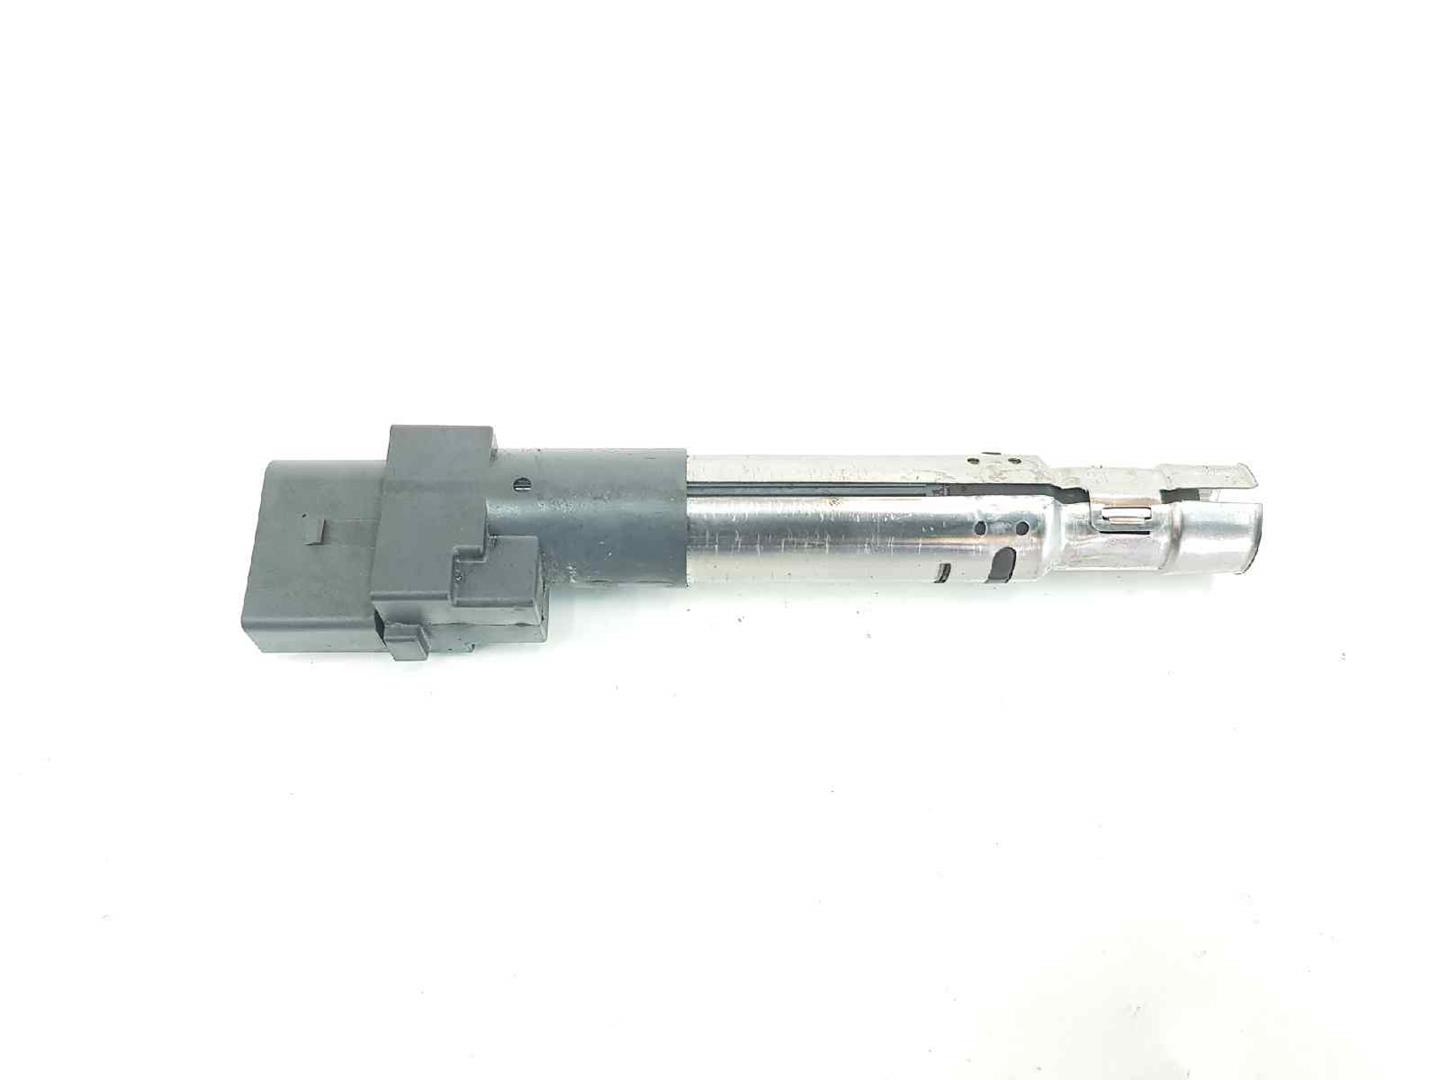 AUDI A2 8Z (1999-2005) High Voltage Ignition Coil 022905715B, 022905715B 19686174